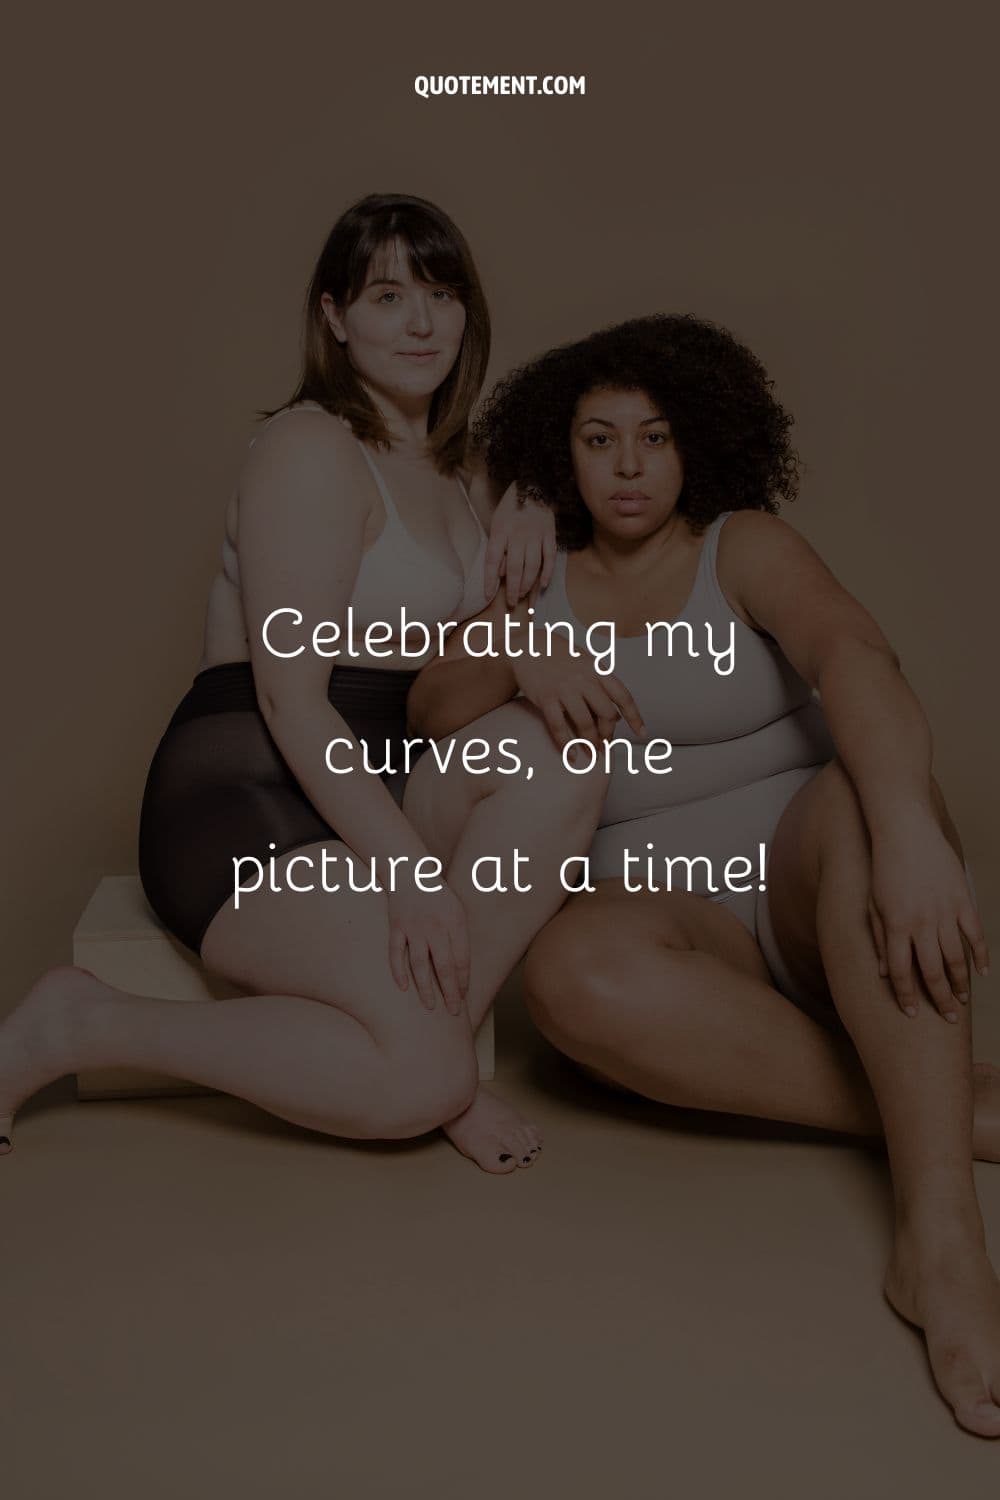 These women redefine societal beauty standards confidently.